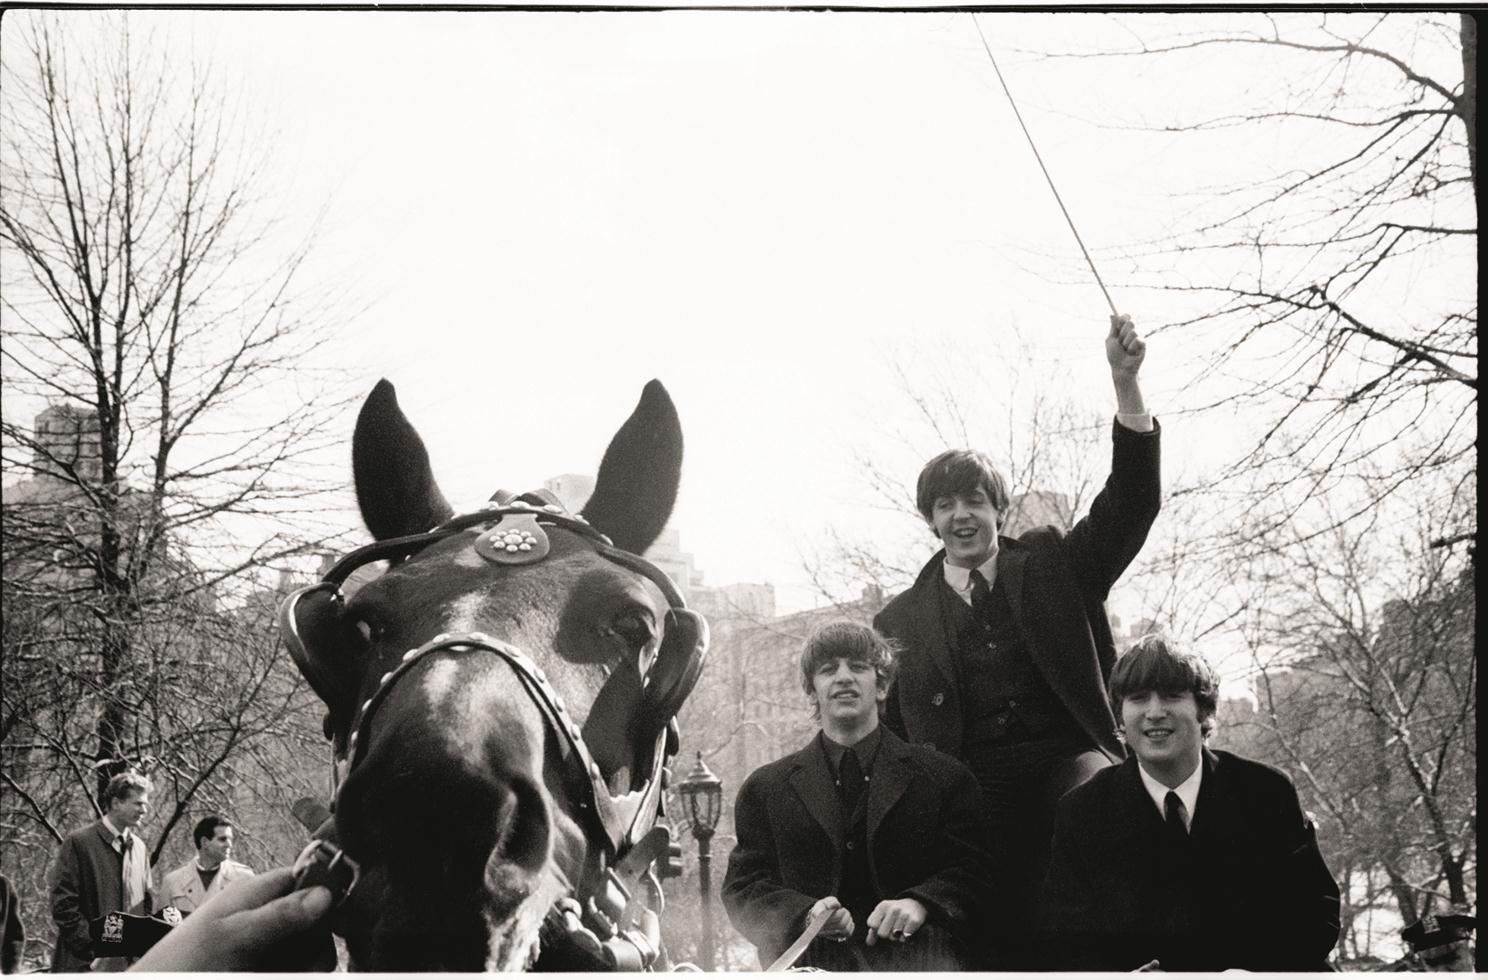 Ken Regan Black and White Photograph - The Beatles, Central Park, NYC